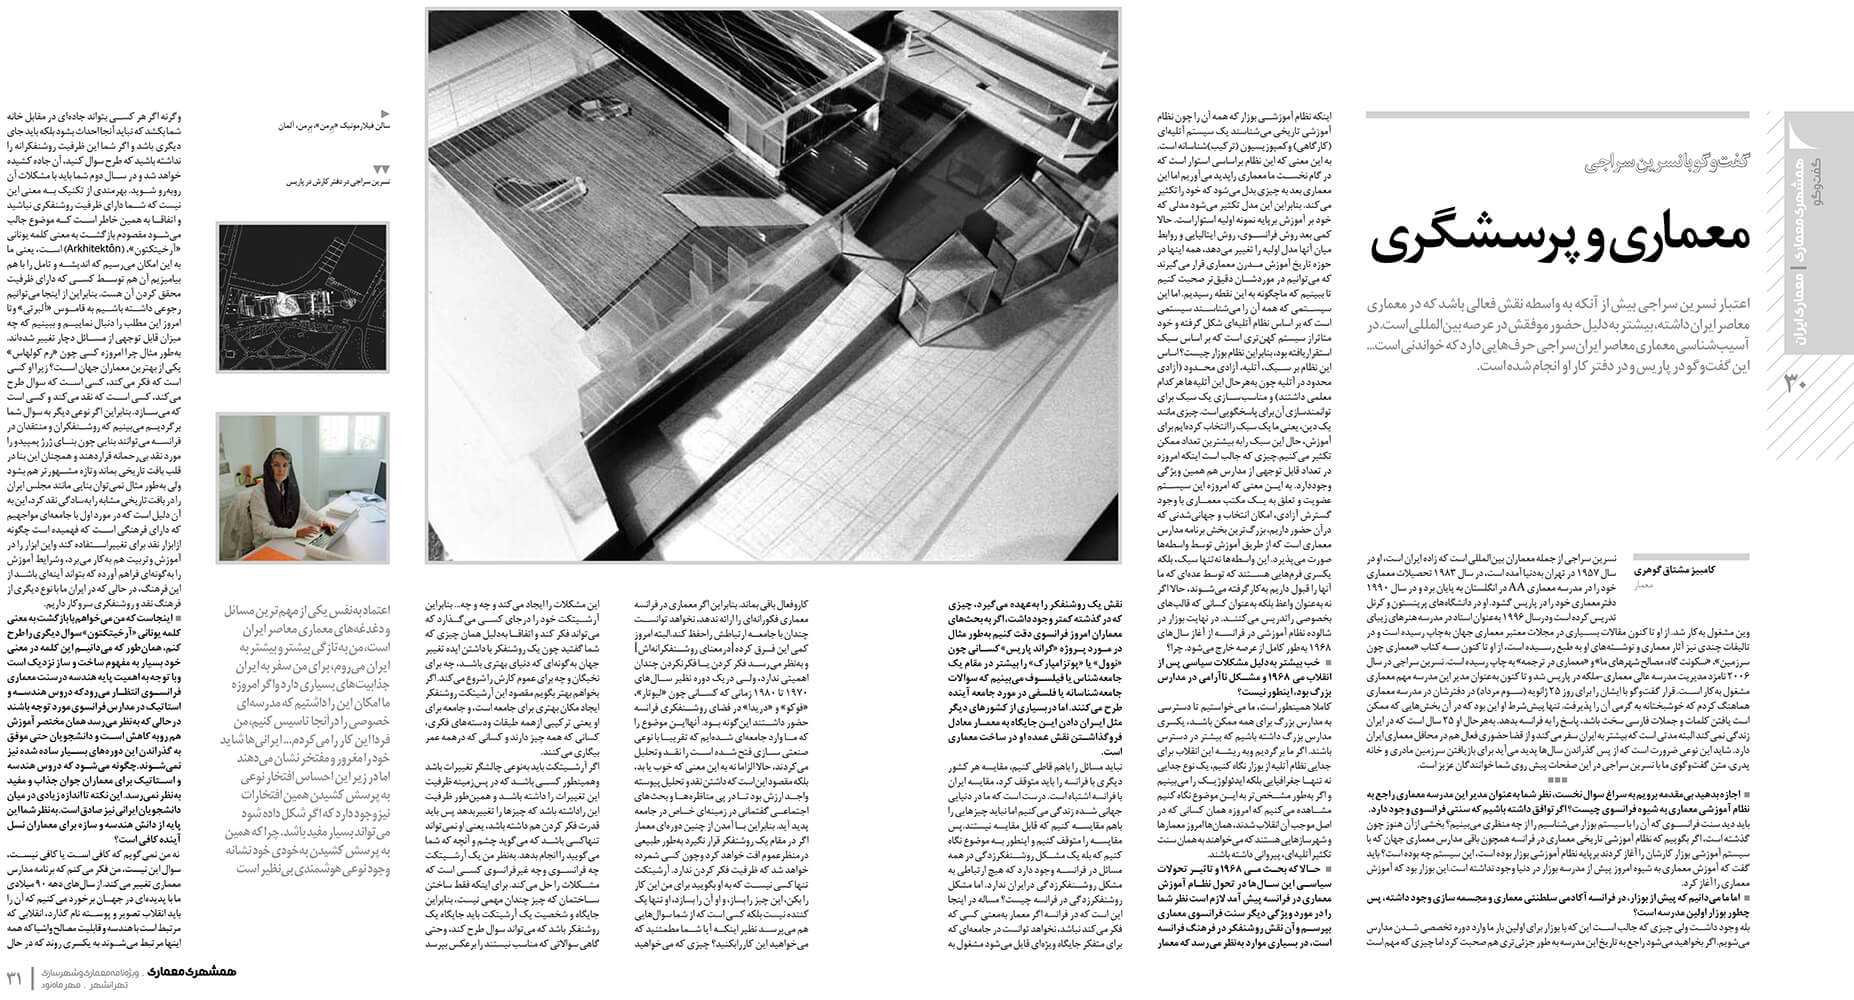 picture no. 2 of publication: Architecture and Questioning, author: Kambiz Moshtaq